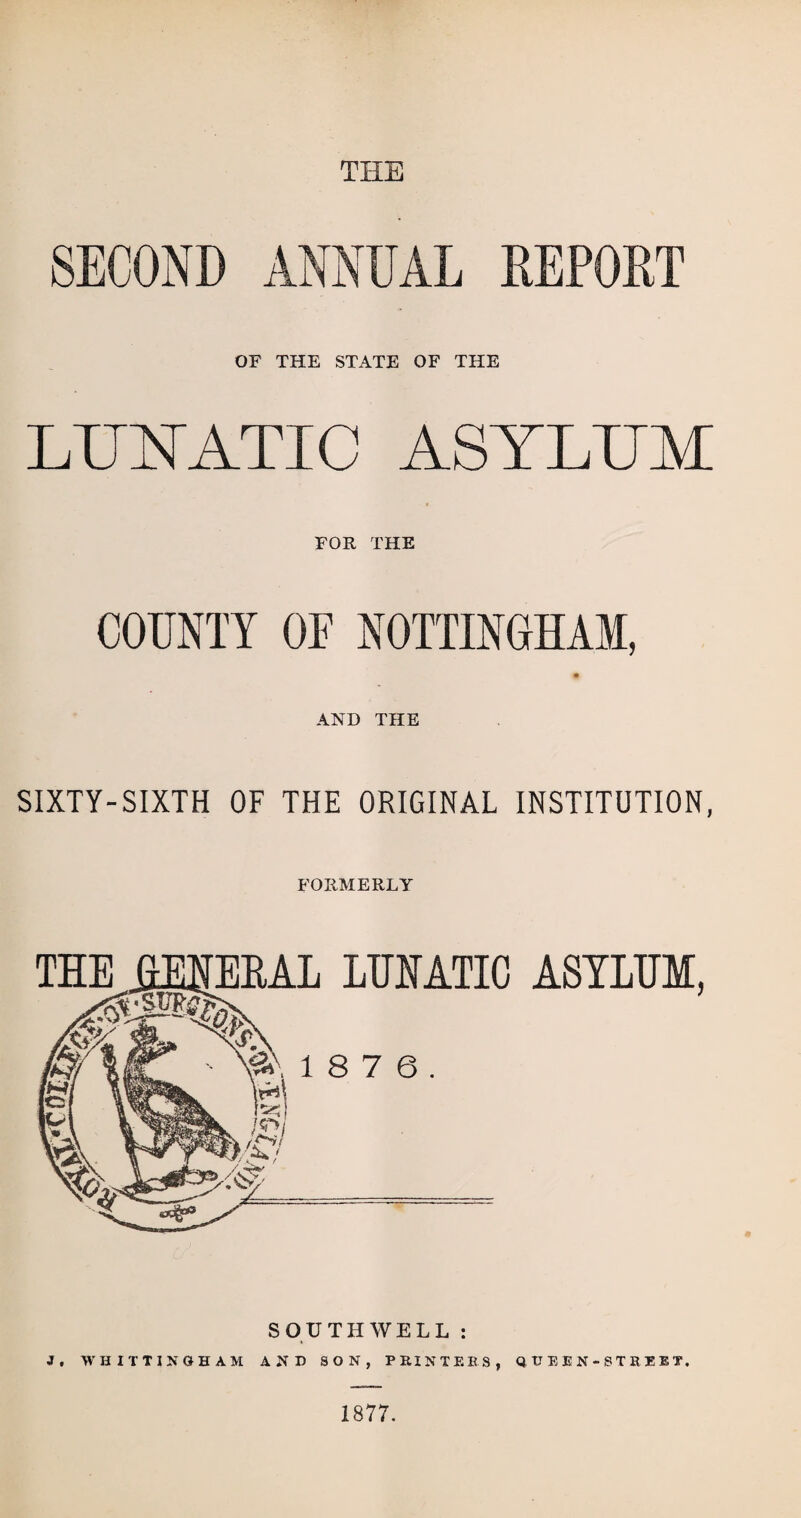 THE SECOND ANNUAL REPORT OF THE STATE OF THE LUNATIC ASYLUM FOR THE COUNTY OF NOTTINGHAM, n AND THE SIXTY-SIXTH OF THE ORIGINAL INSTITUTION, FORMERLY LUNATIC ASYLUM, 8 7 6. SOUTHWELL : J. WHITTI NOHAM AND SON, PRINT EES, QUEEN-STREET. 1877.